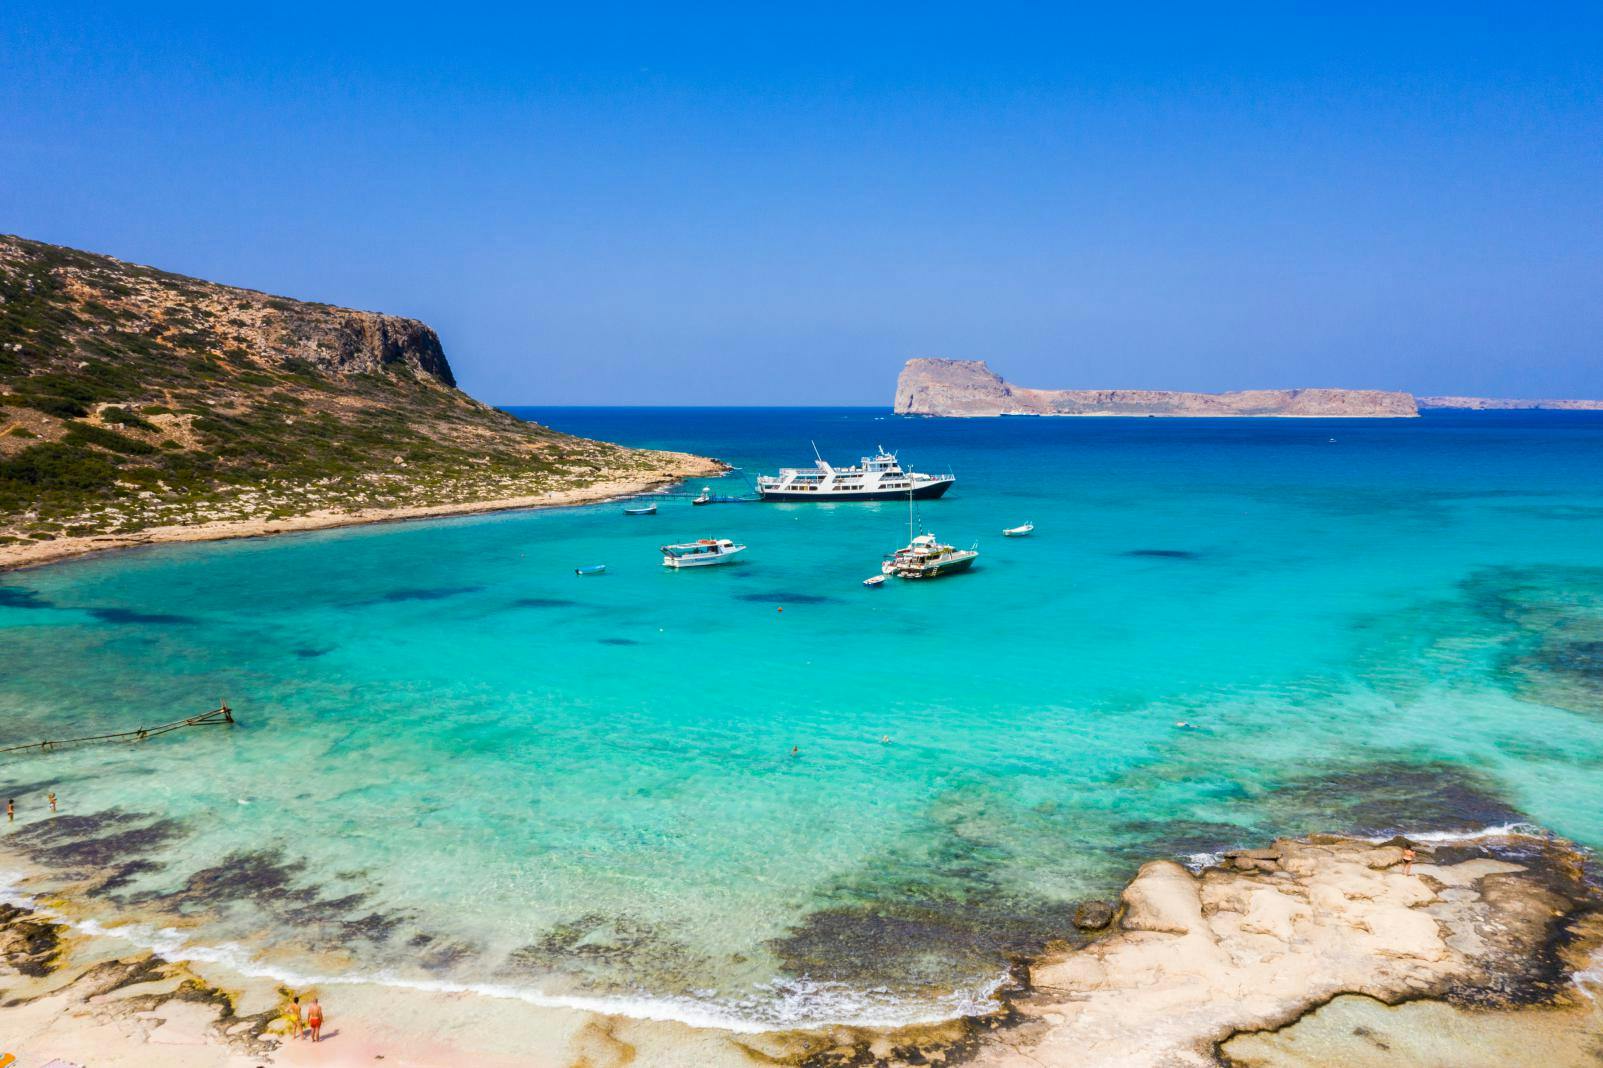 Guided tour of Gramvousa and Balos lagoon from Chania Musement